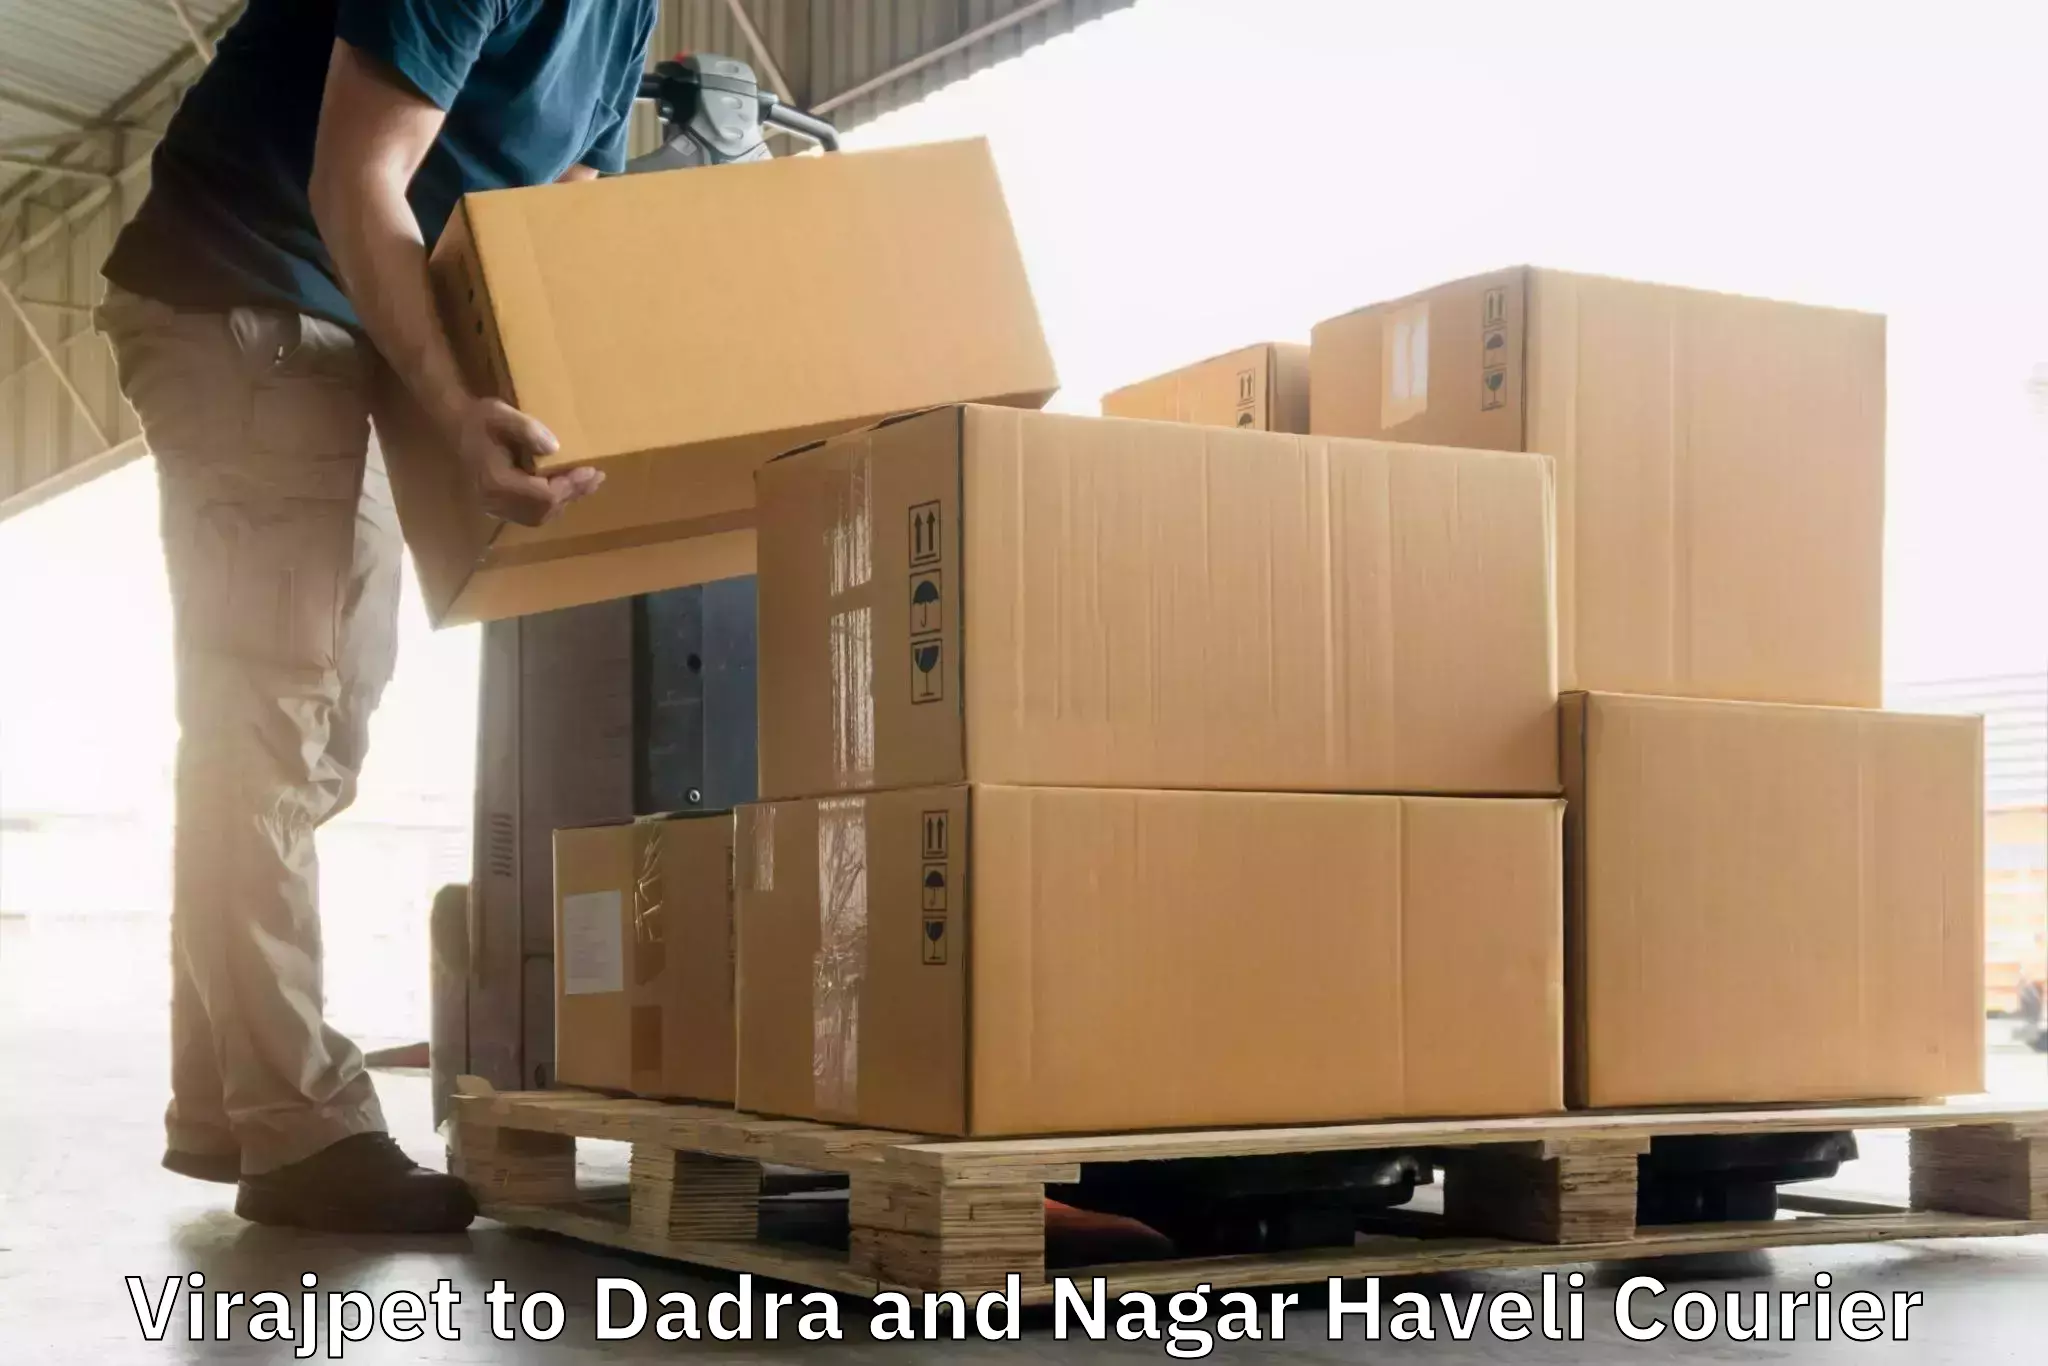 Quality courier services Virajpet to Dadra and Nagar Haveli